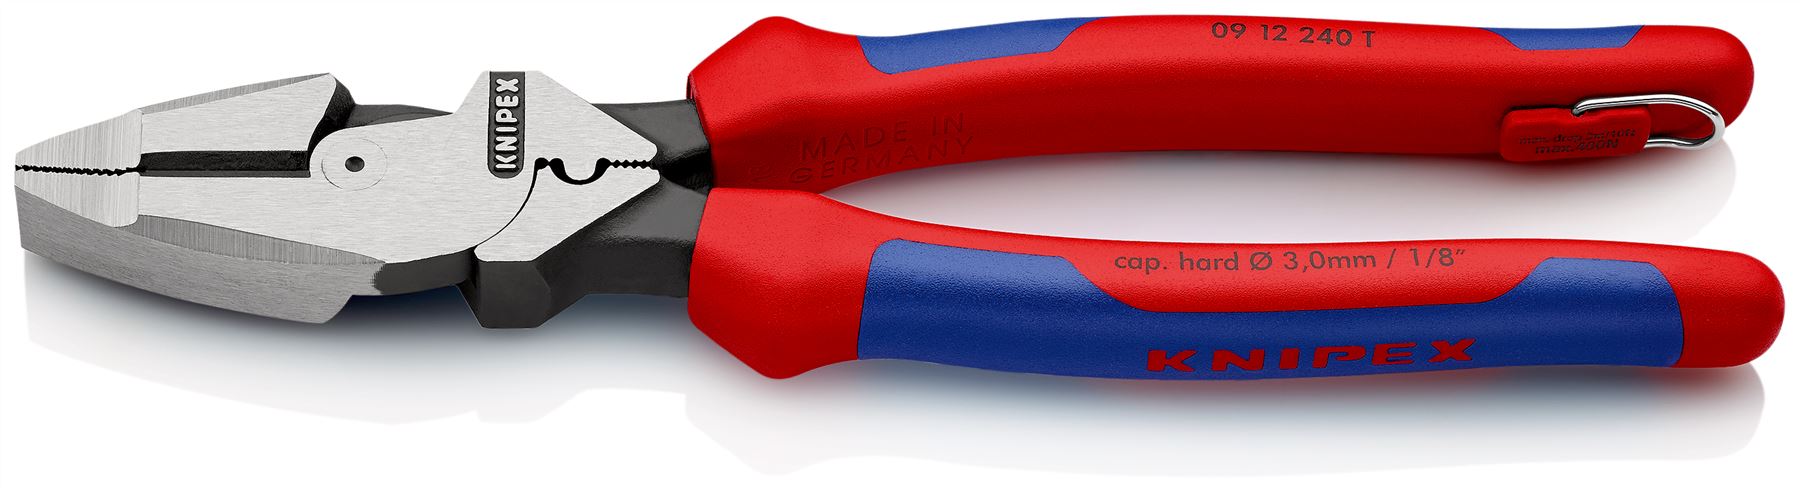 Knipex Linemans Pliers American Style 240mm Slim Multi Component Grips with Tether Point 09 12 240 T